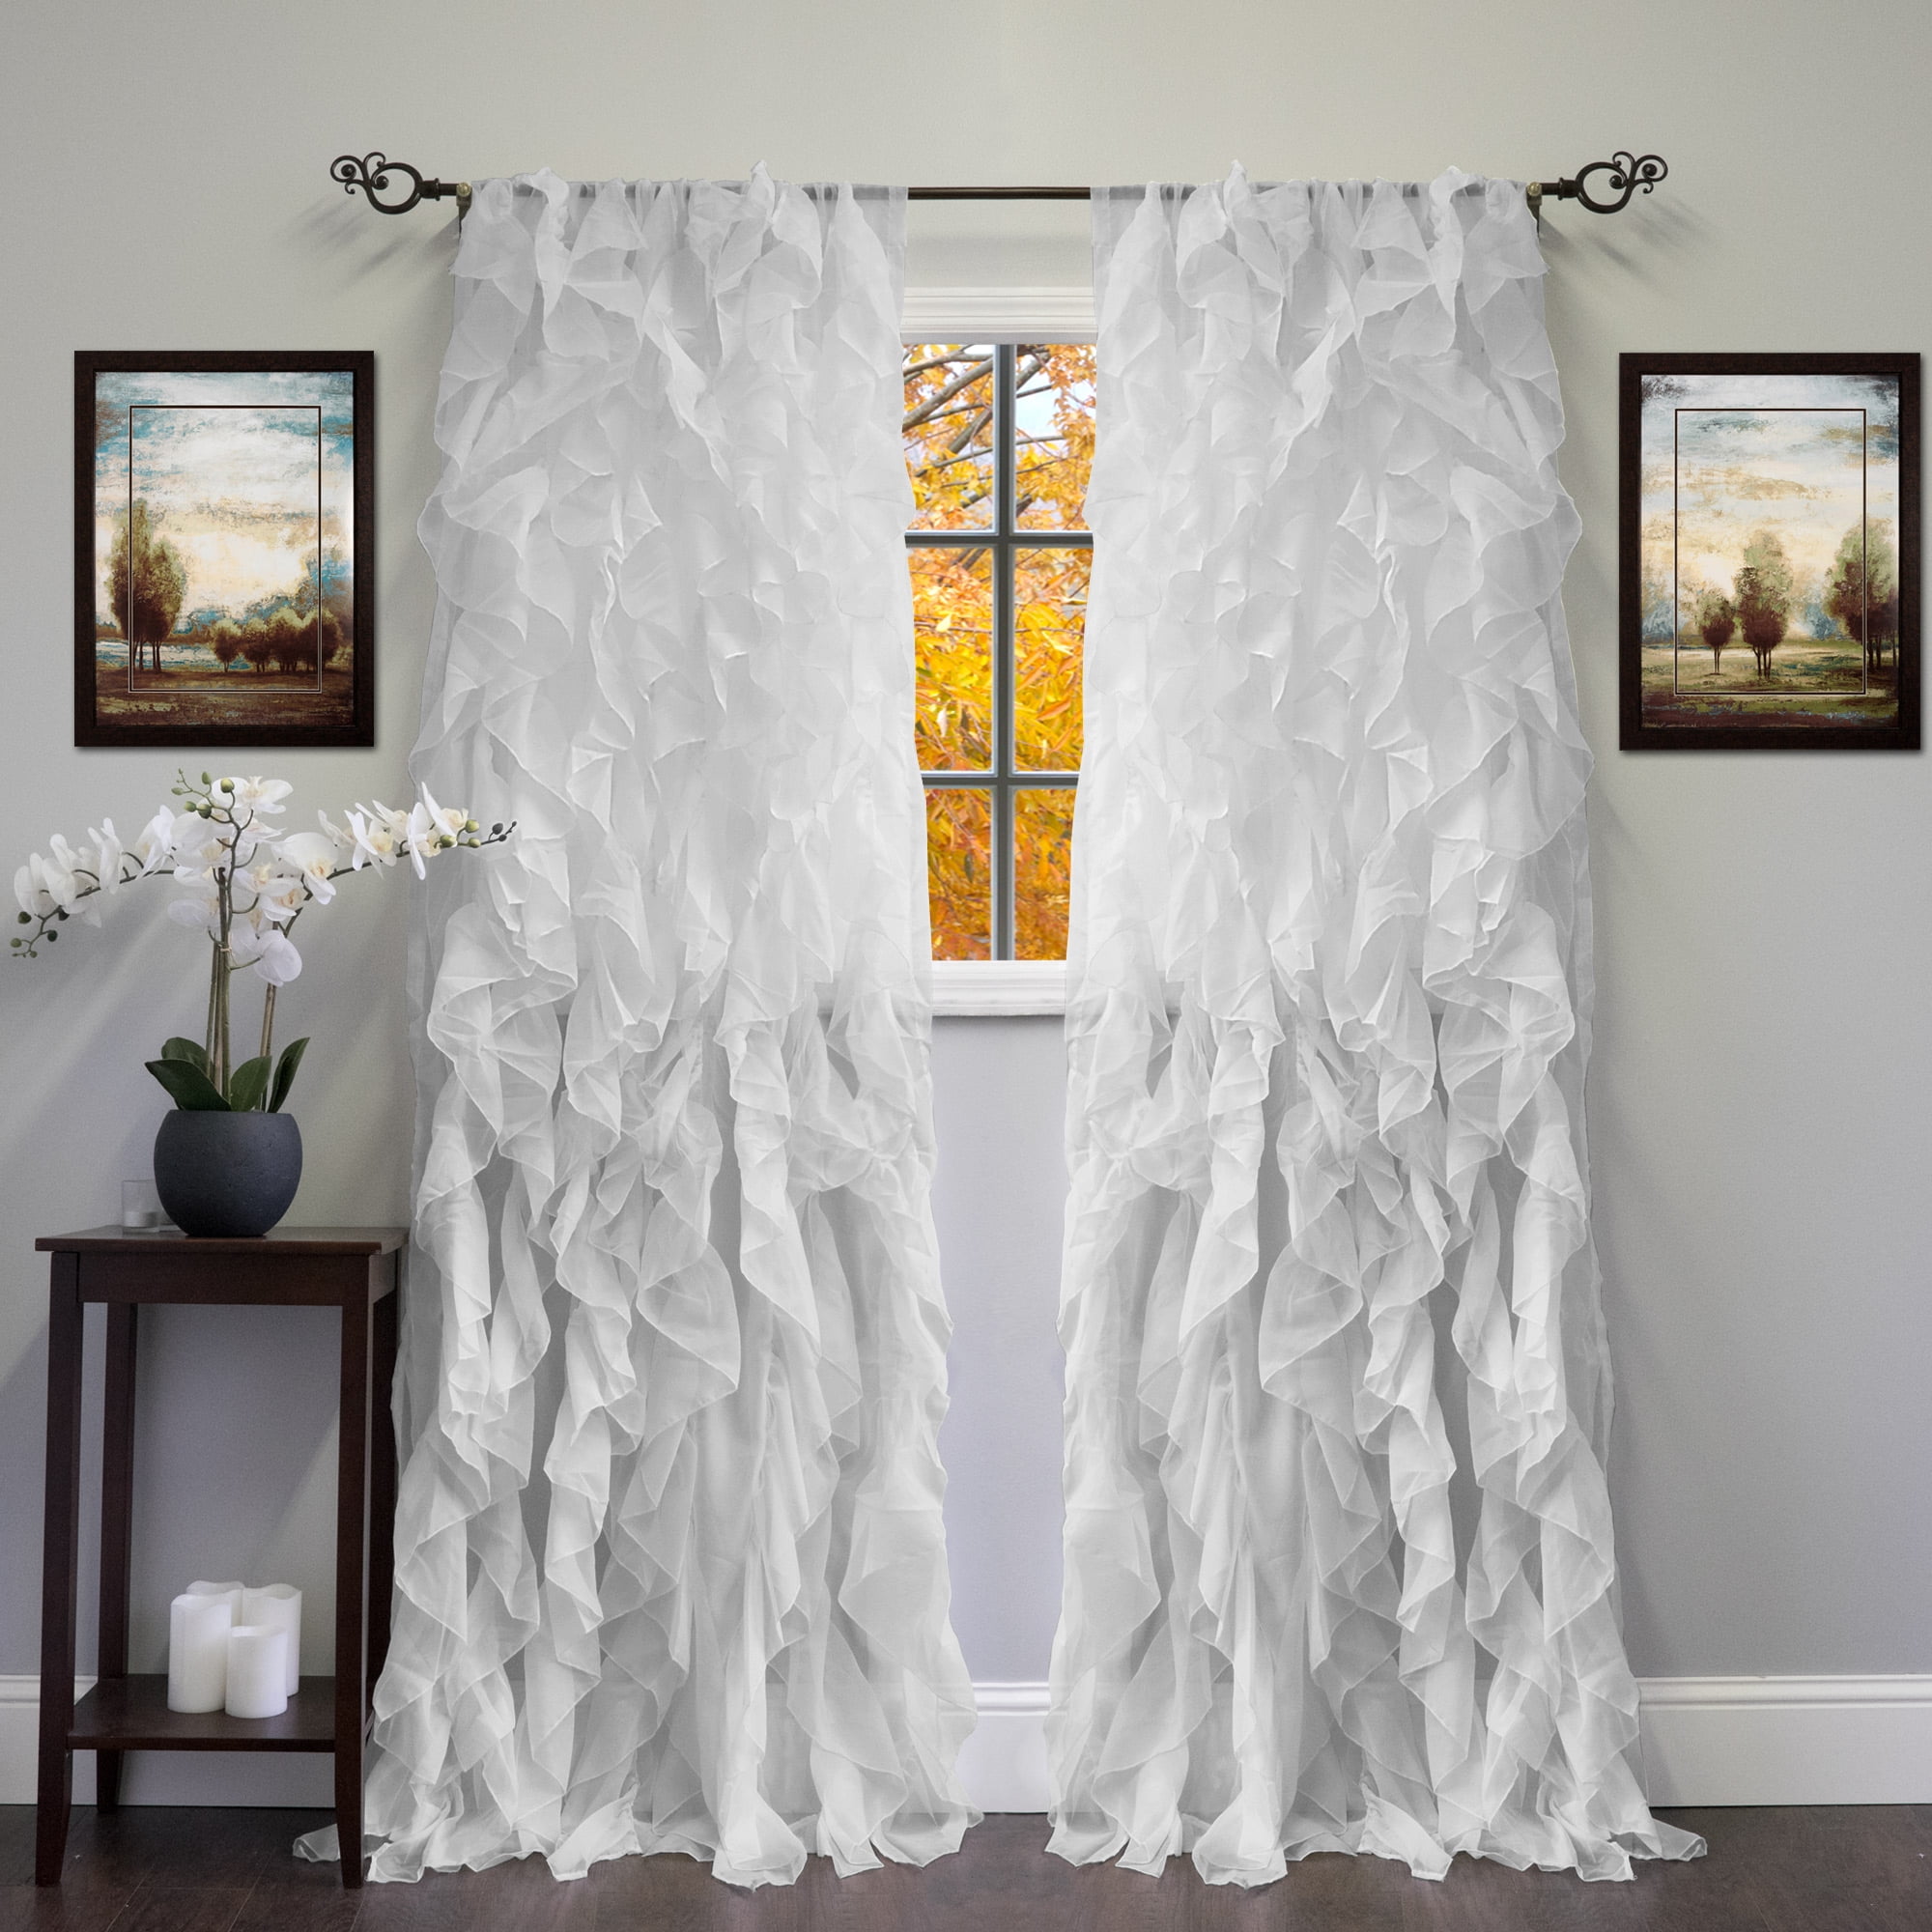 Sheer Voile Vertical Ruffle Window Kitchen Curtain Tiers or Valance Gray 